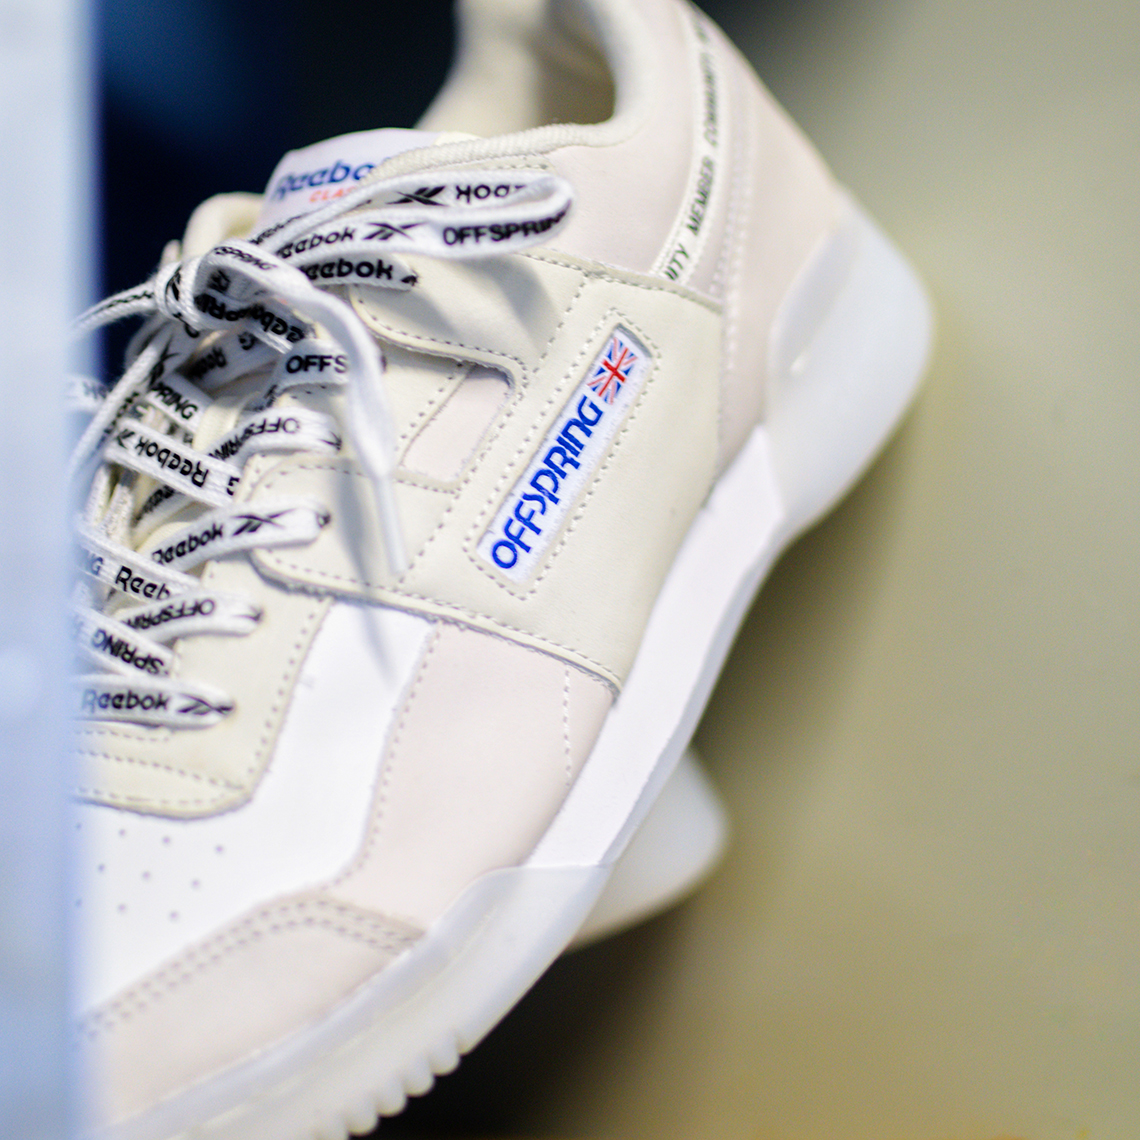 Offspring Reebok Uses Community Workout Plus Ice Release Date 11